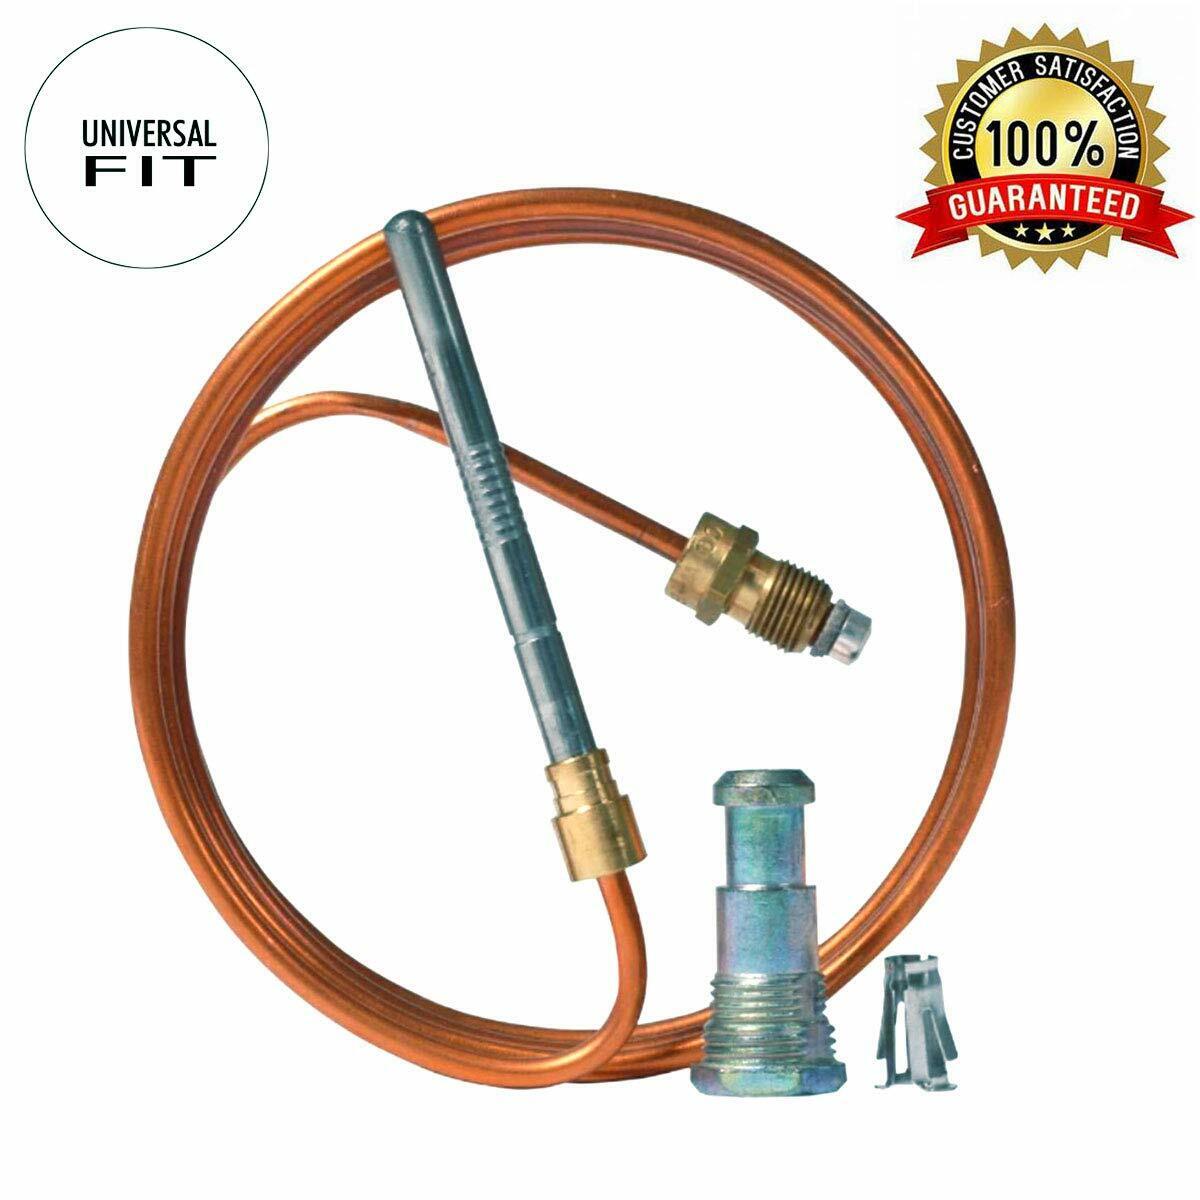 104 Plumbing Plus 24 Inch Thermocouple Universal Use Thermal Coupler Heater